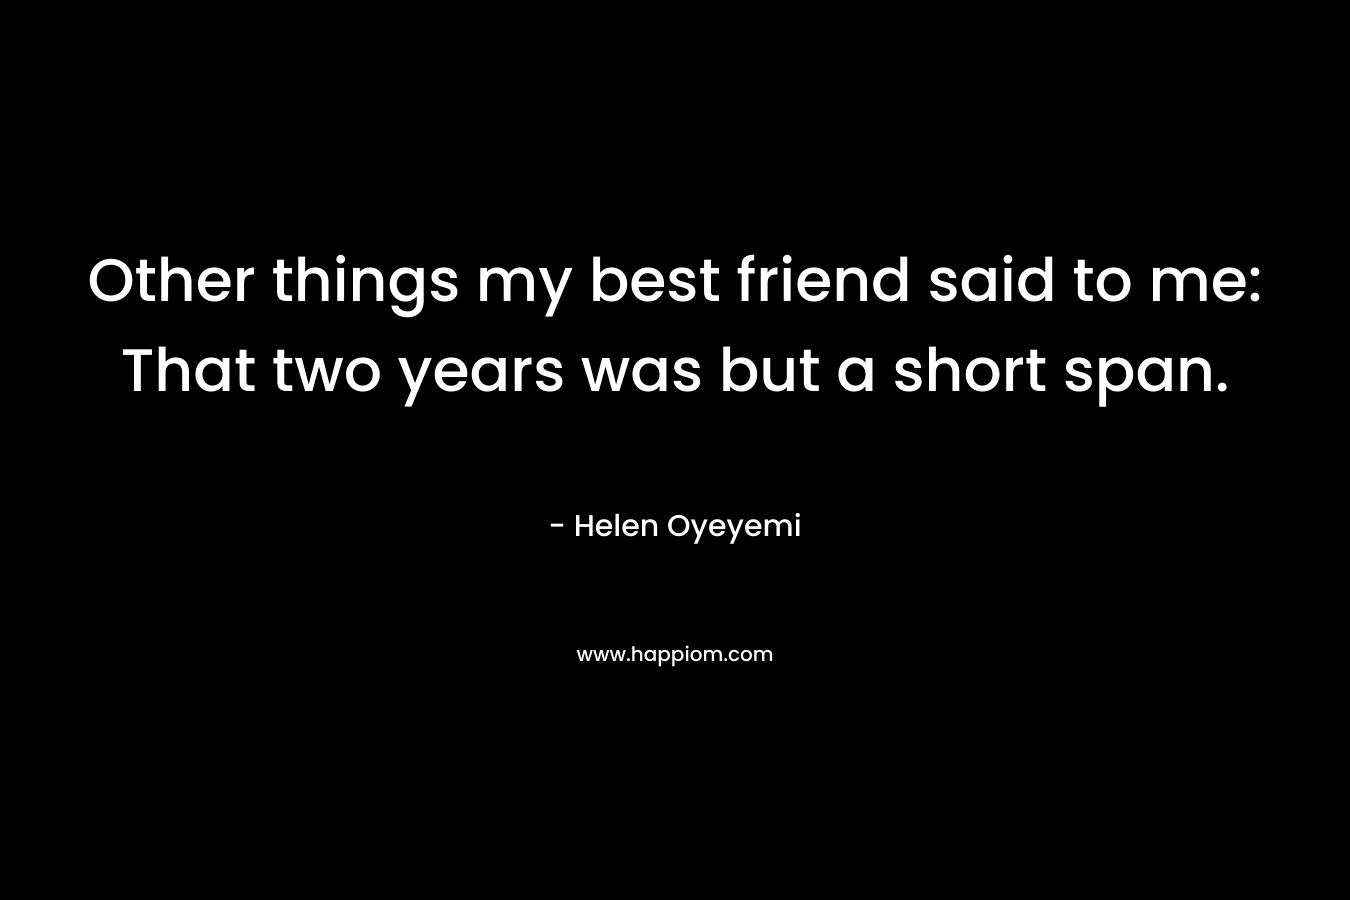 Other things my best friend said to me: That two years was but a short span. – Helen Oyeyemi